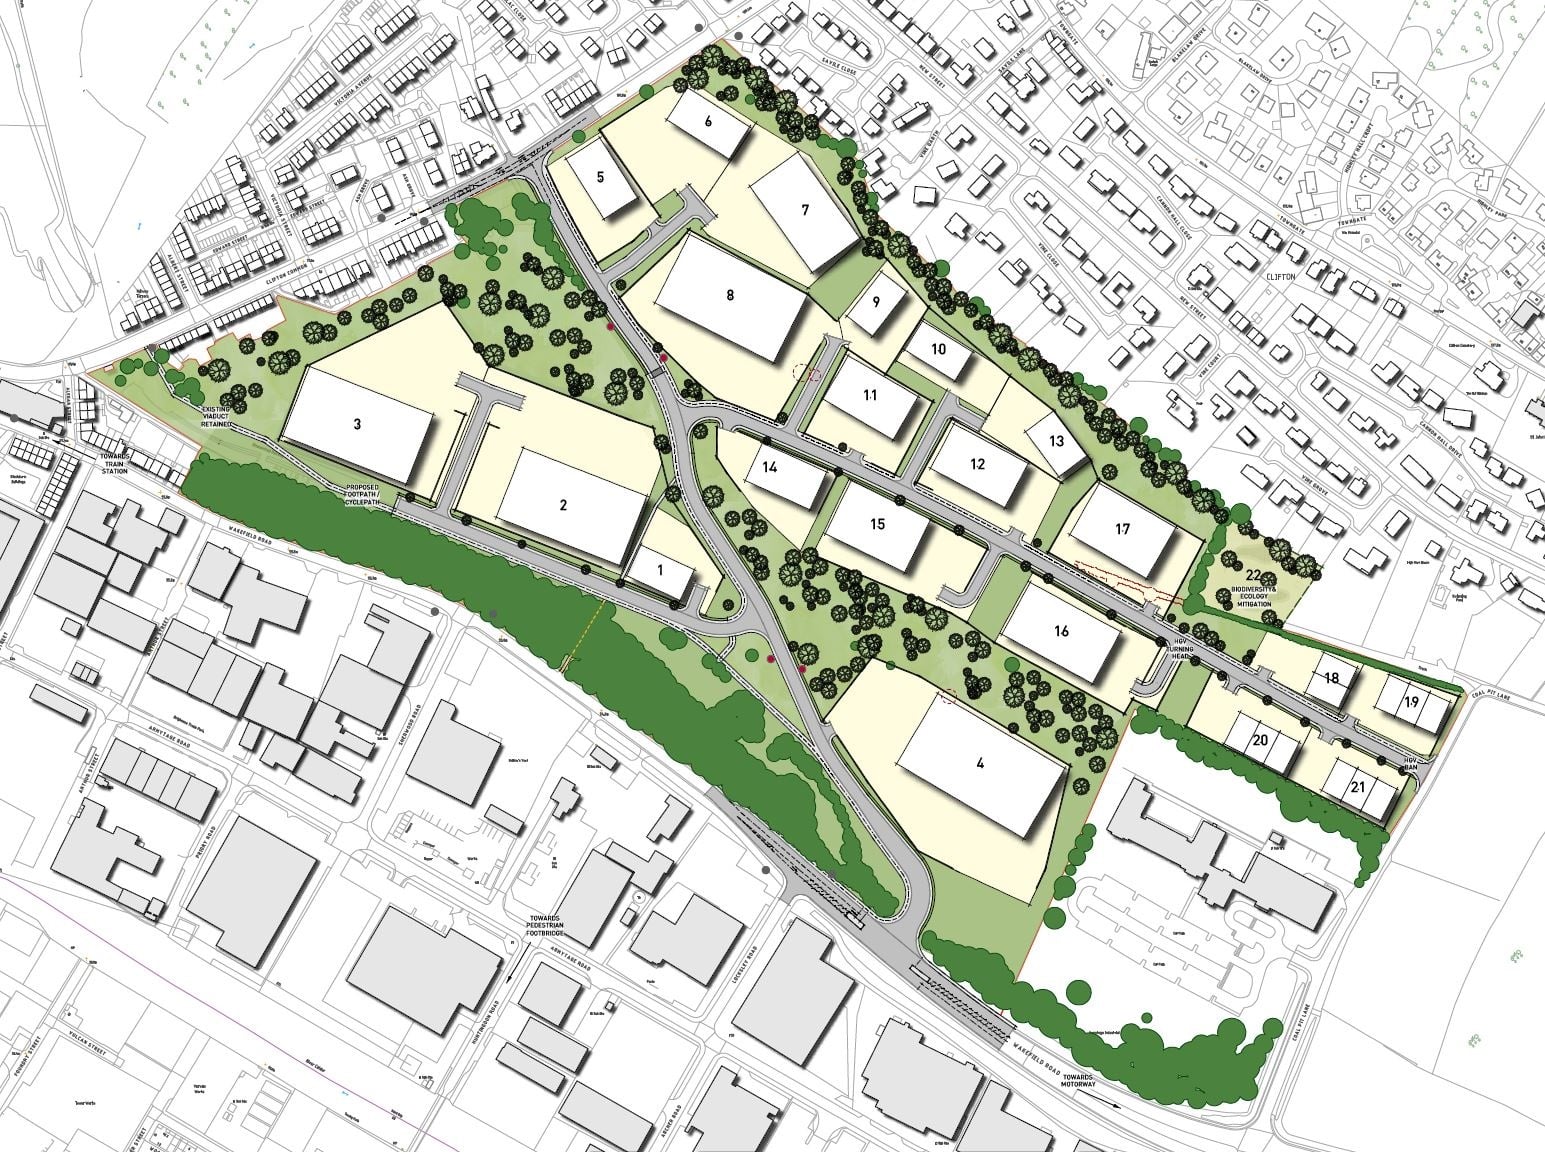 Plan of proposal for Clifton Business Park shows locations for business units and associated infrastructure